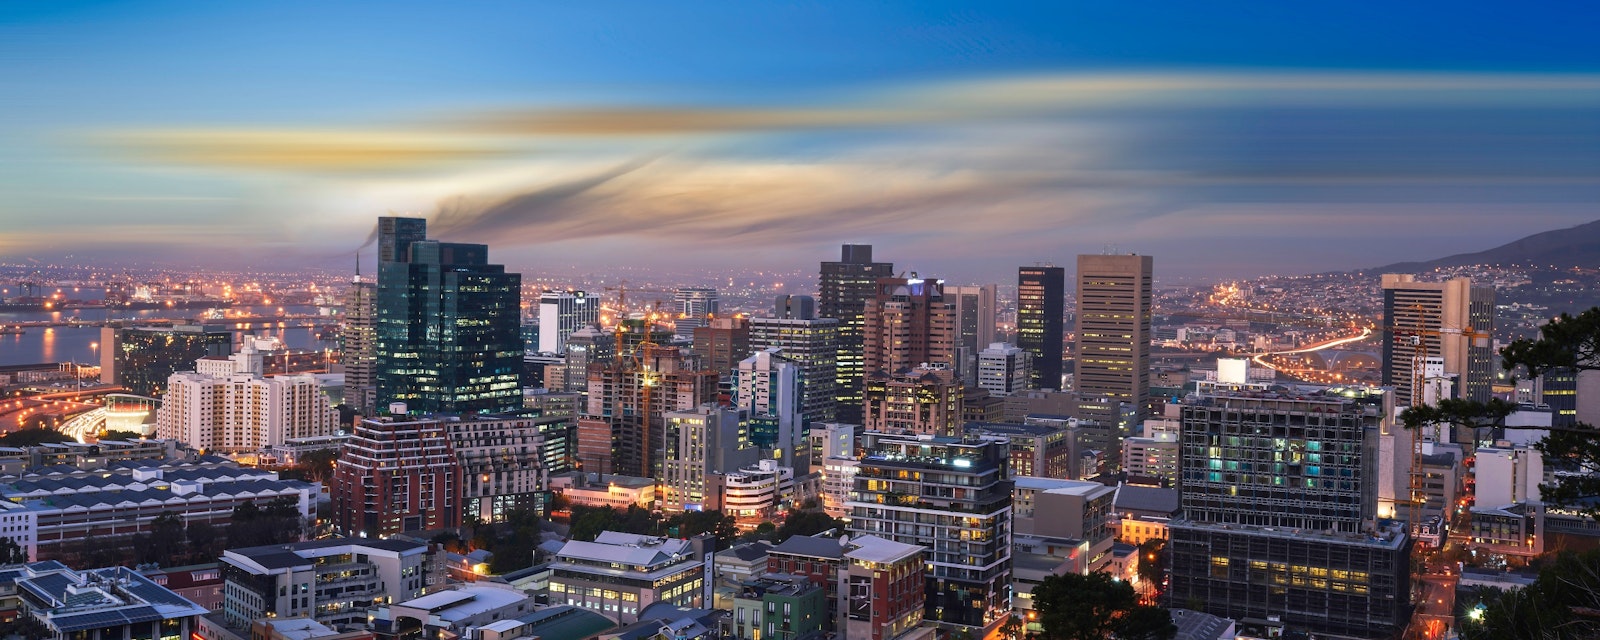 Cape,Town,City,Cbd,Skylines,At,Night,Just,After,Sunset